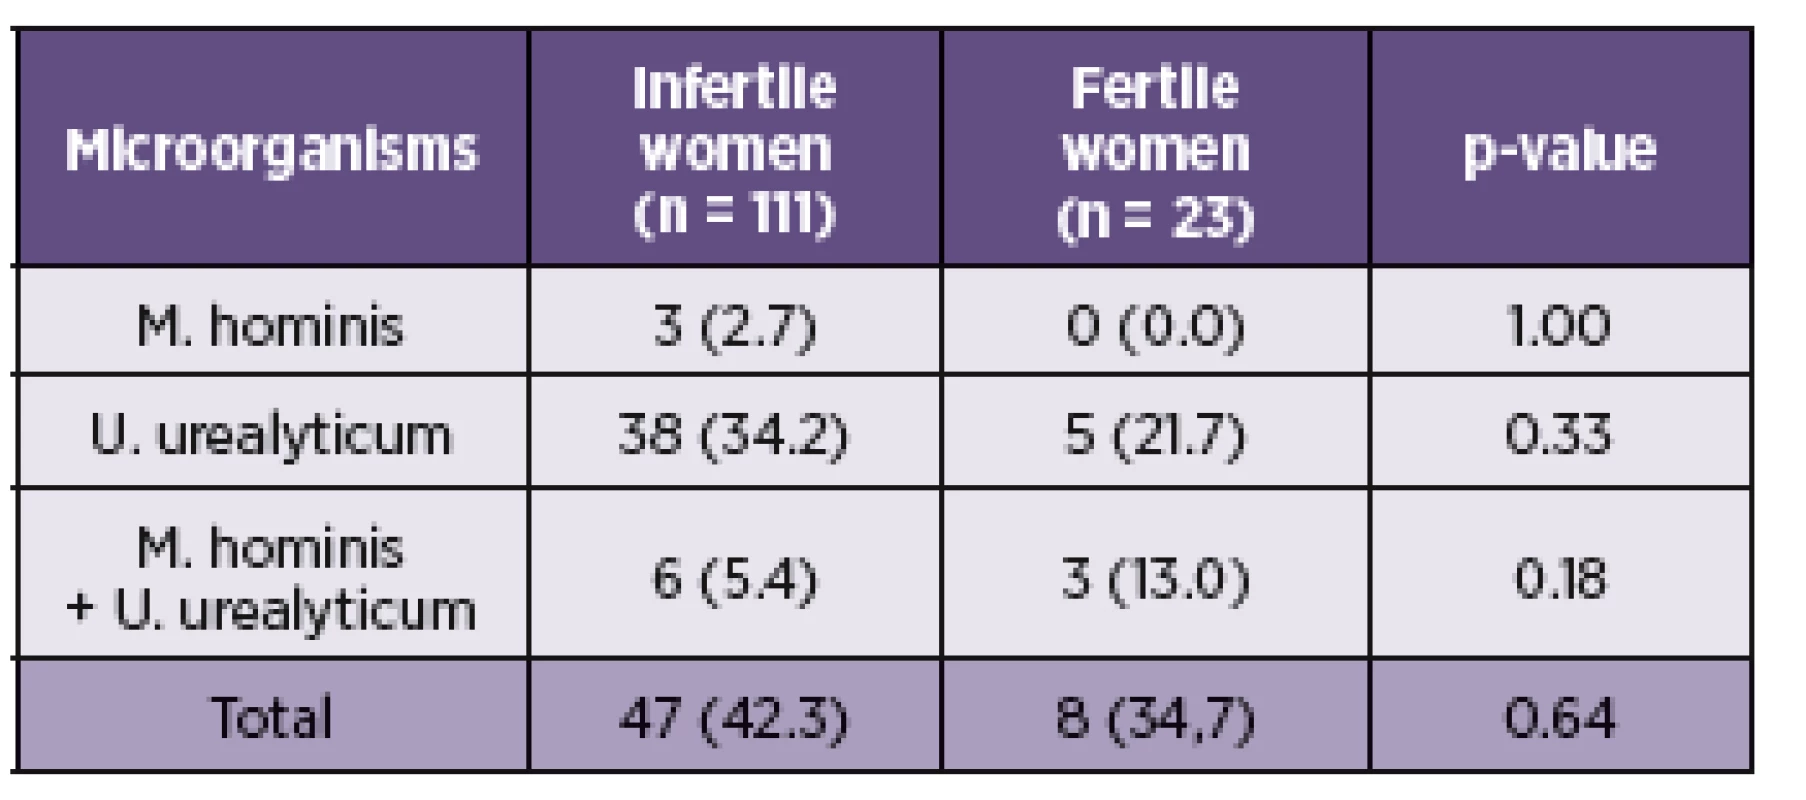 Presence of <i>U. urealyticum</i> and <i>M. hominis</i> in the cervical swabs from fertile and infertile women